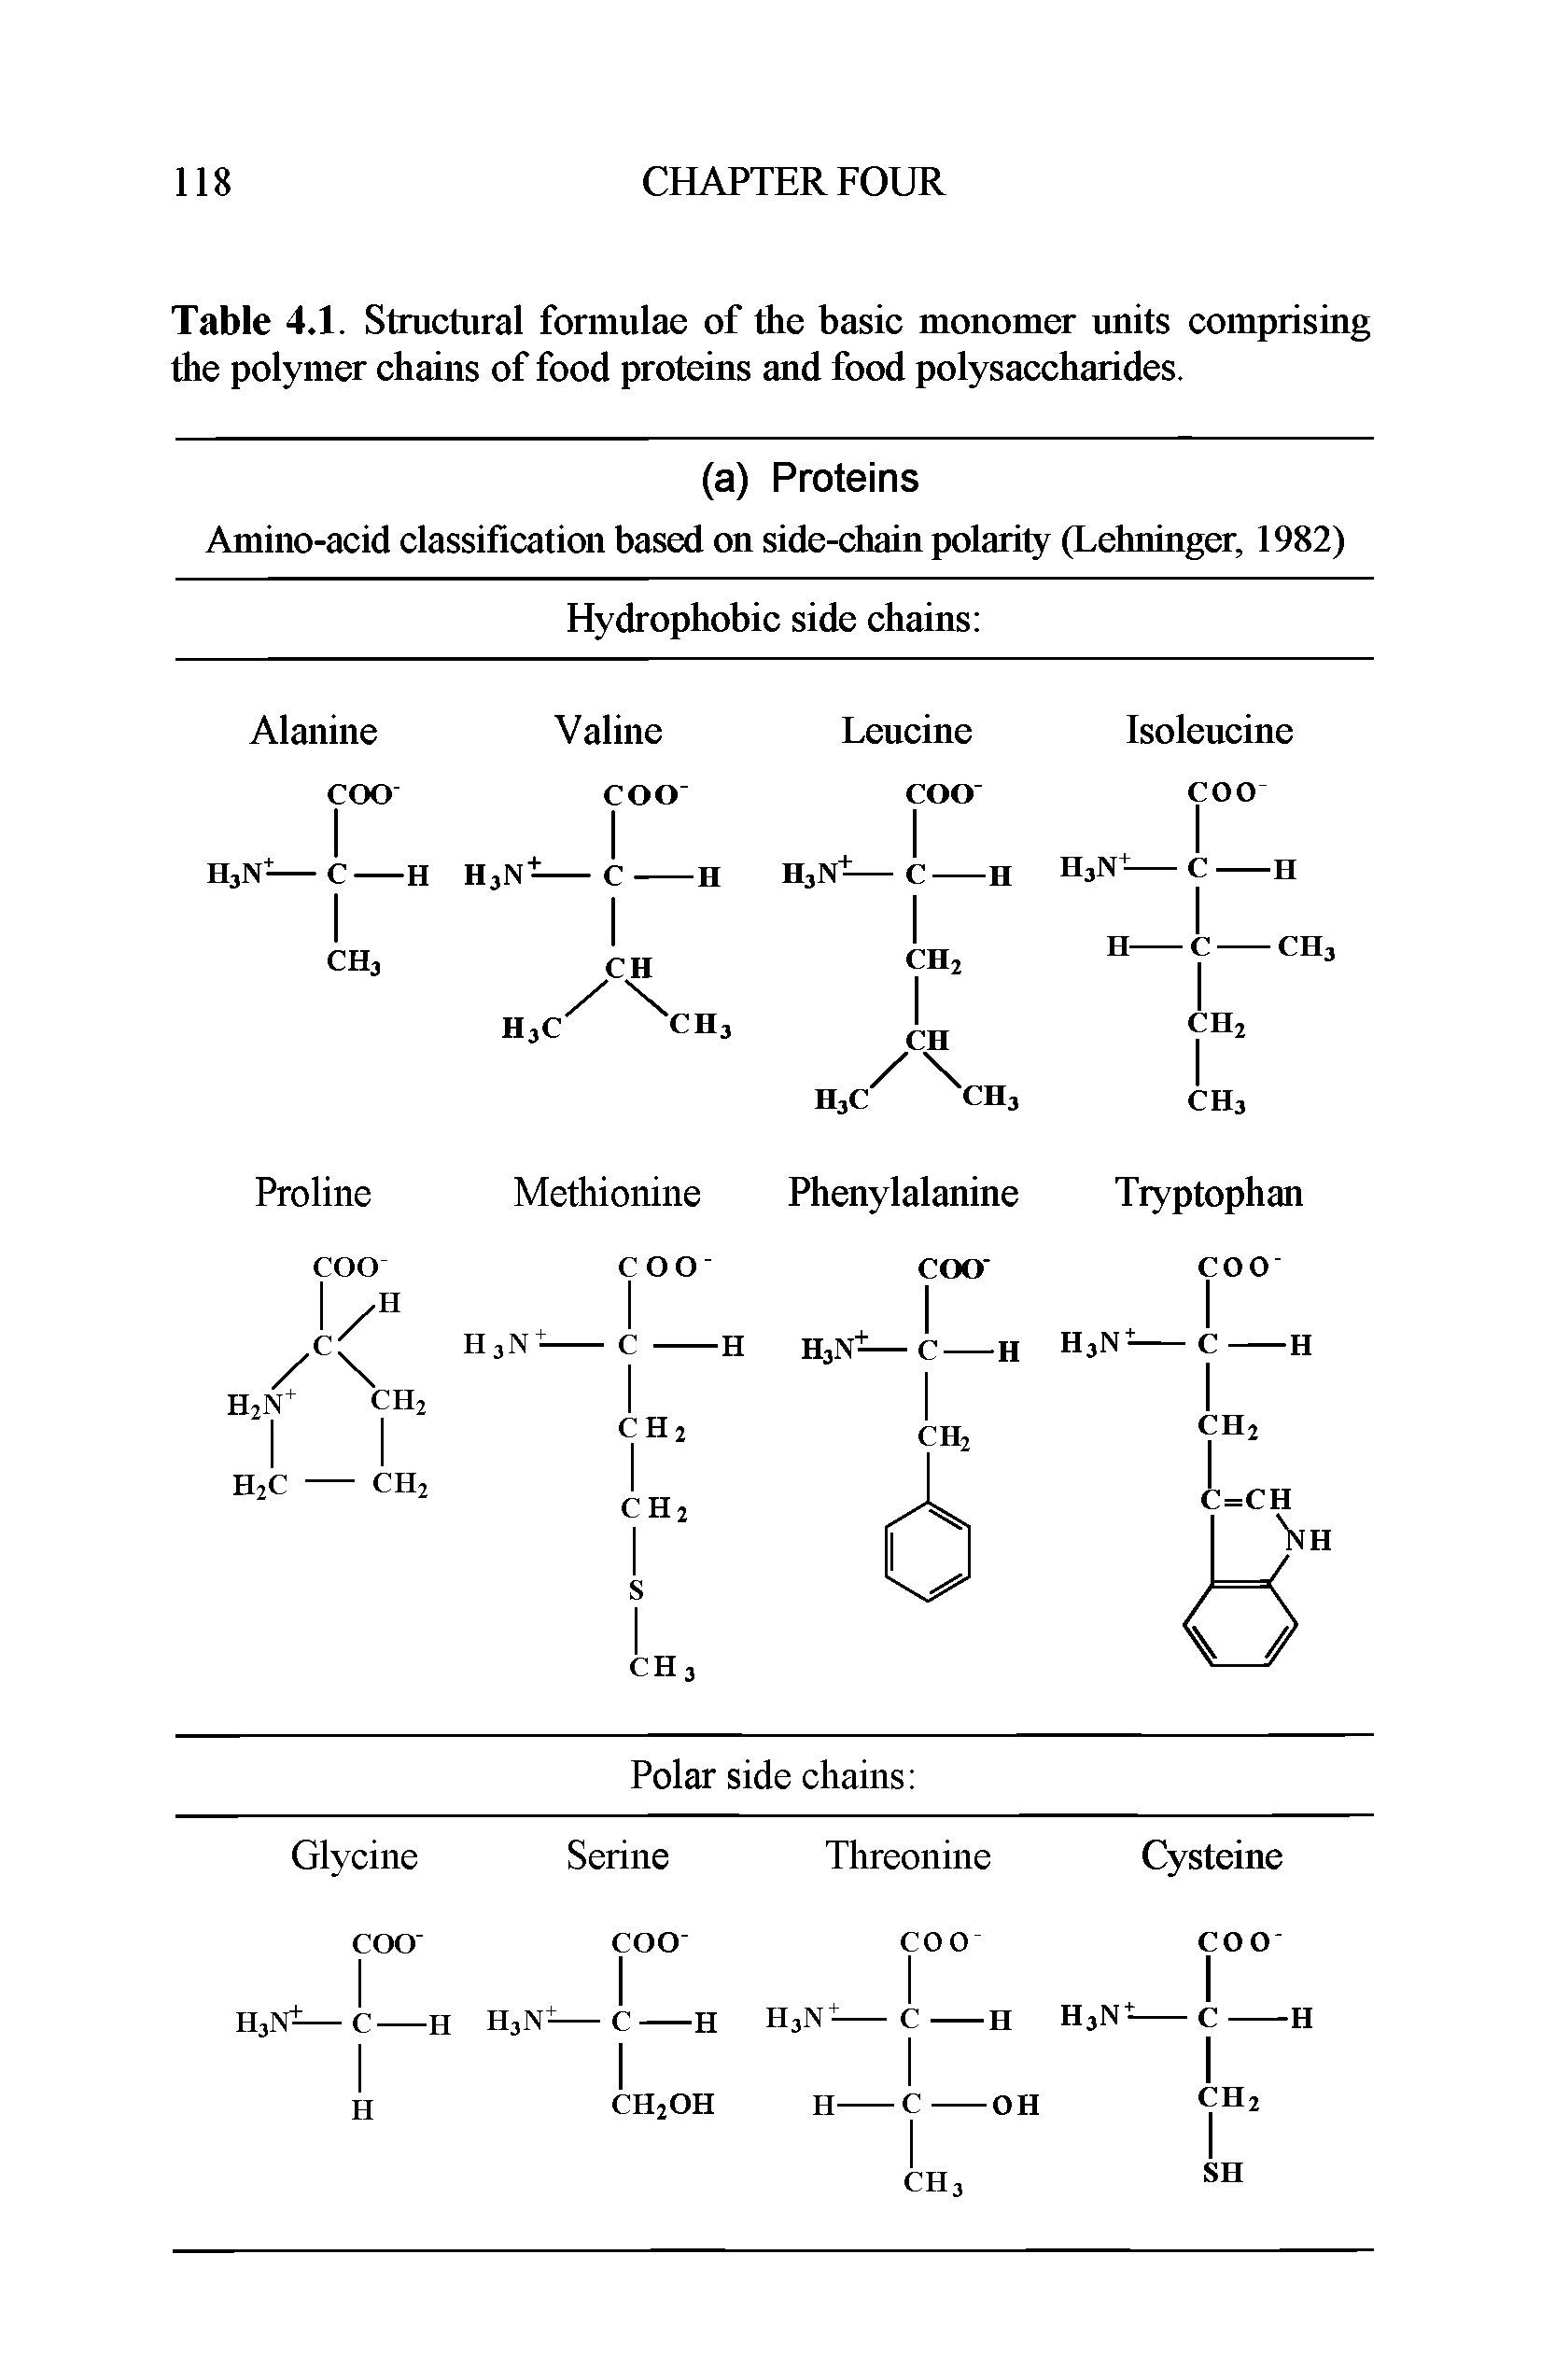 Table 4.1. Structural formulae of the basic monomer units comprising the polymer chains of food proteins and food polysaccharides.